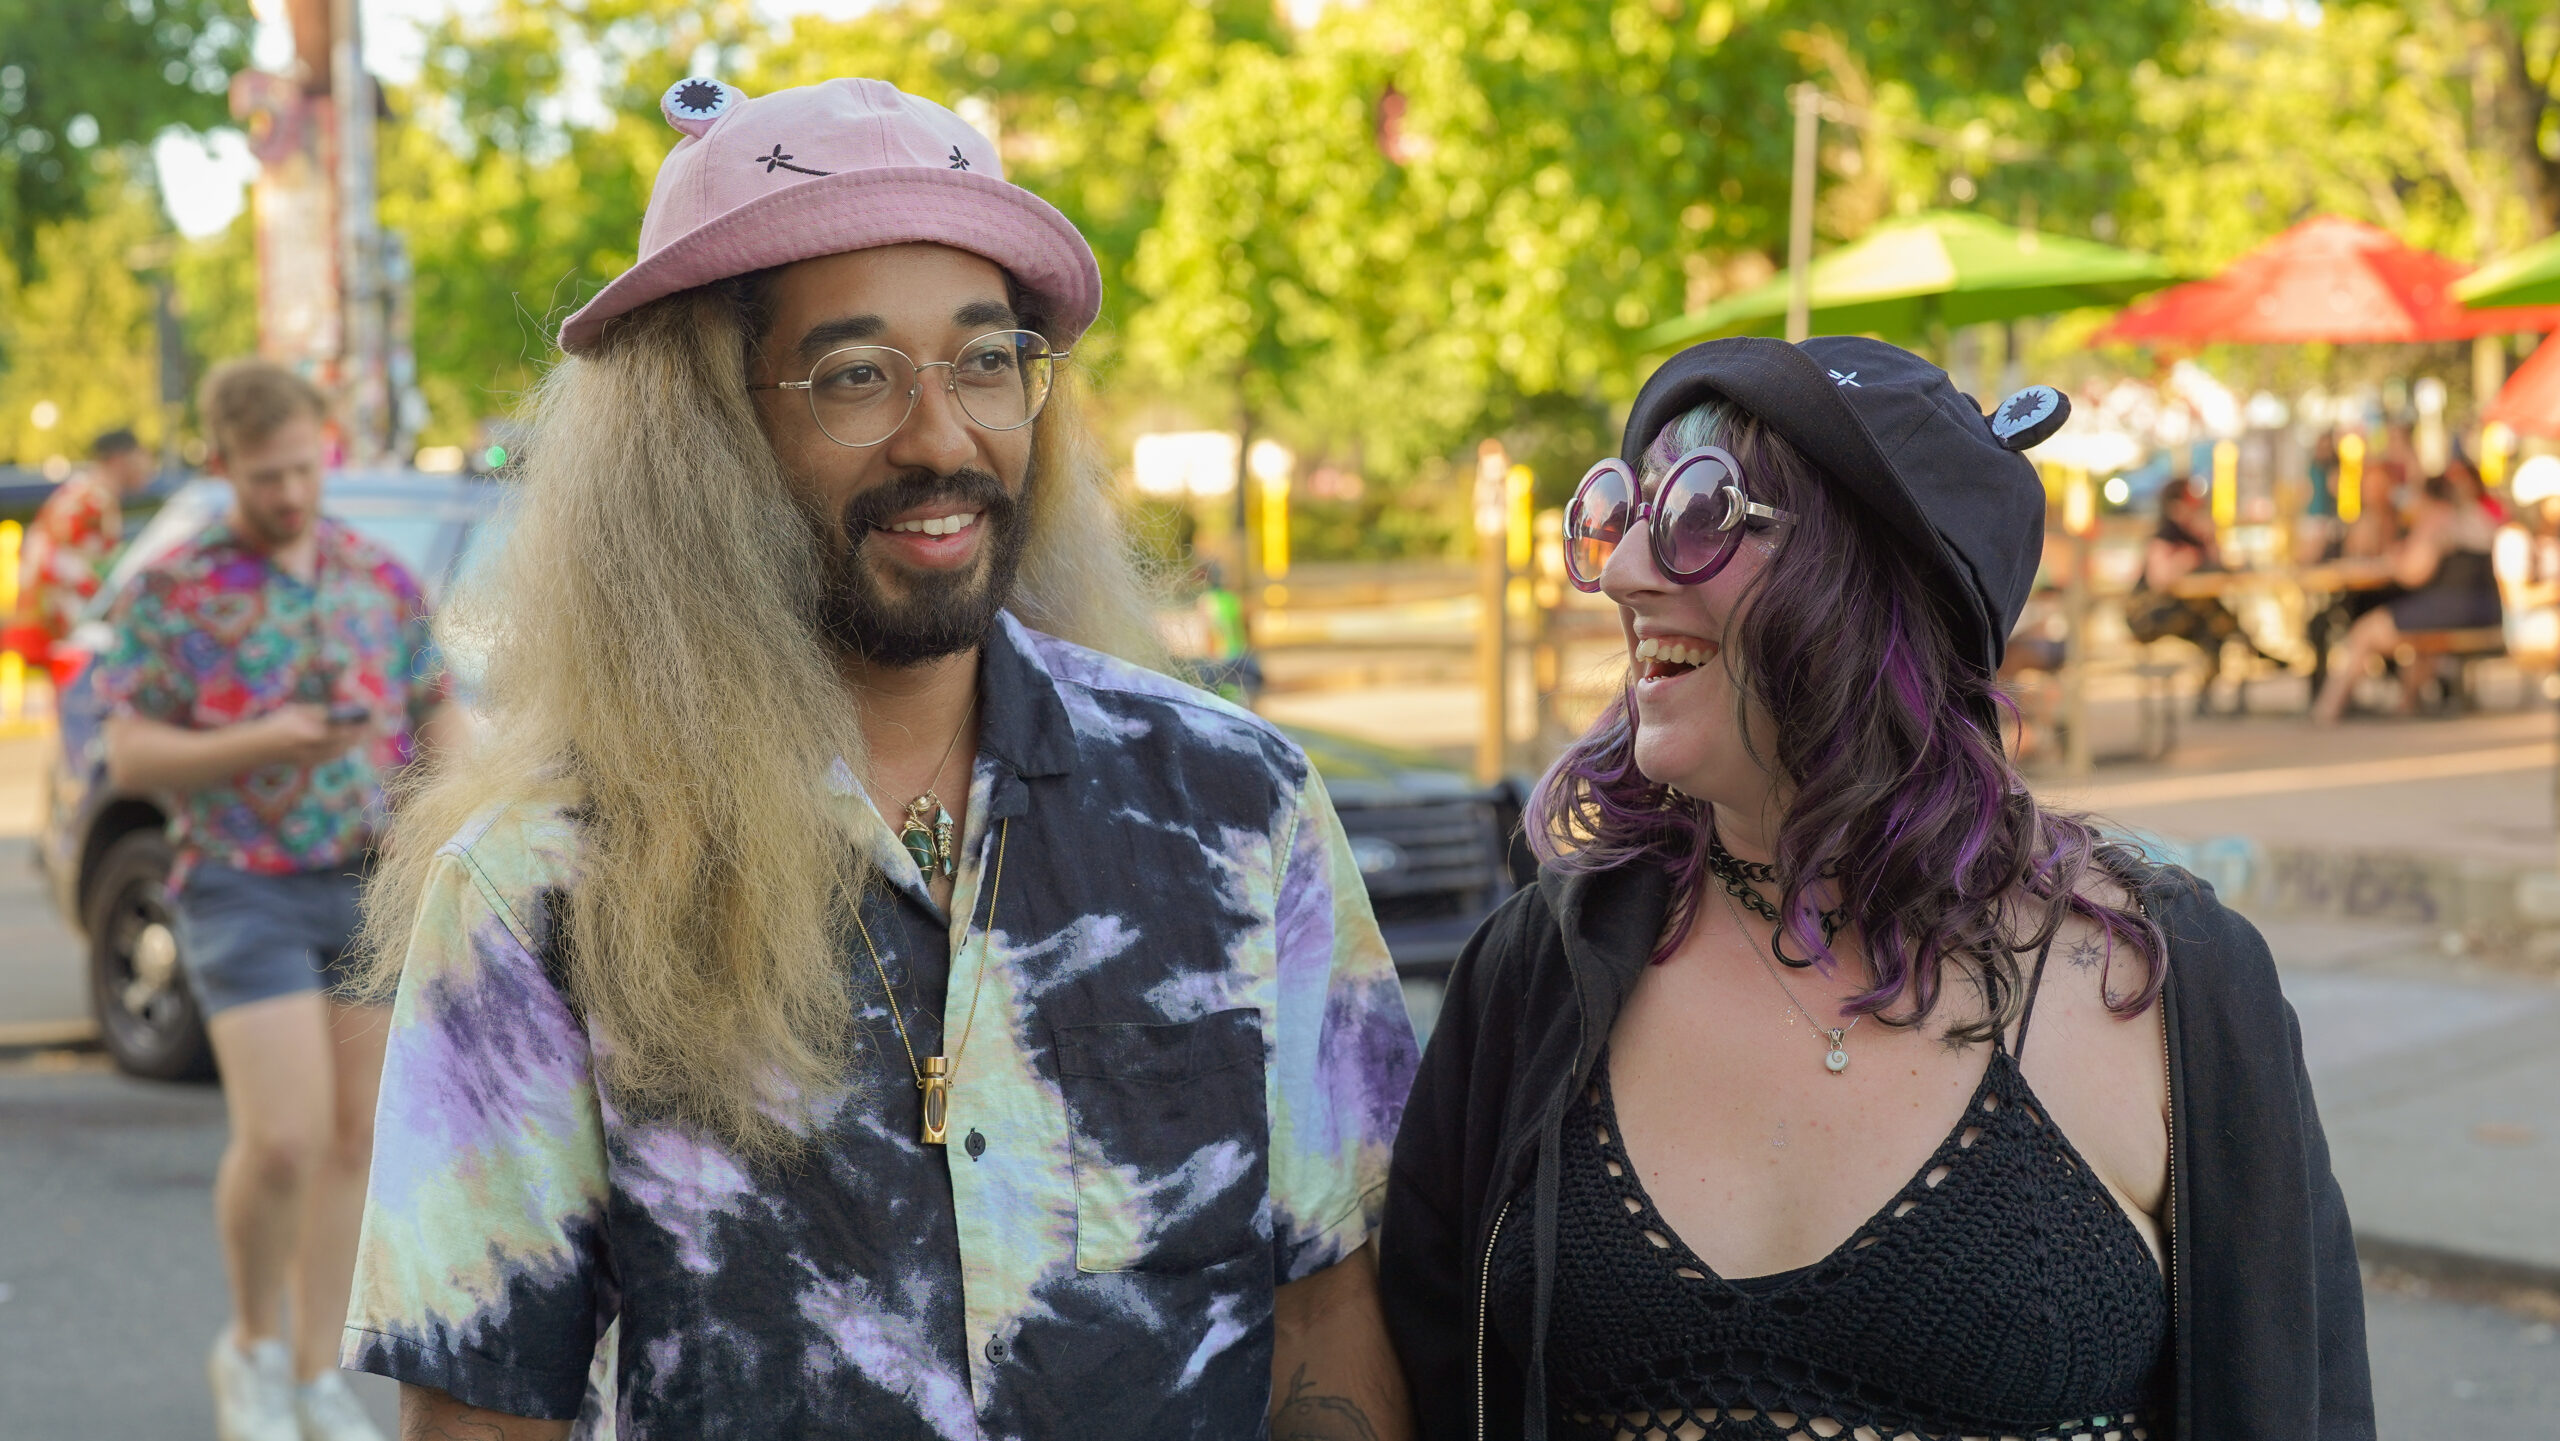 Couple Lamont Allen, left, and Beka Carr are rocking matching froggy hats complimented by
alternative summer ensembles inspired by punk.